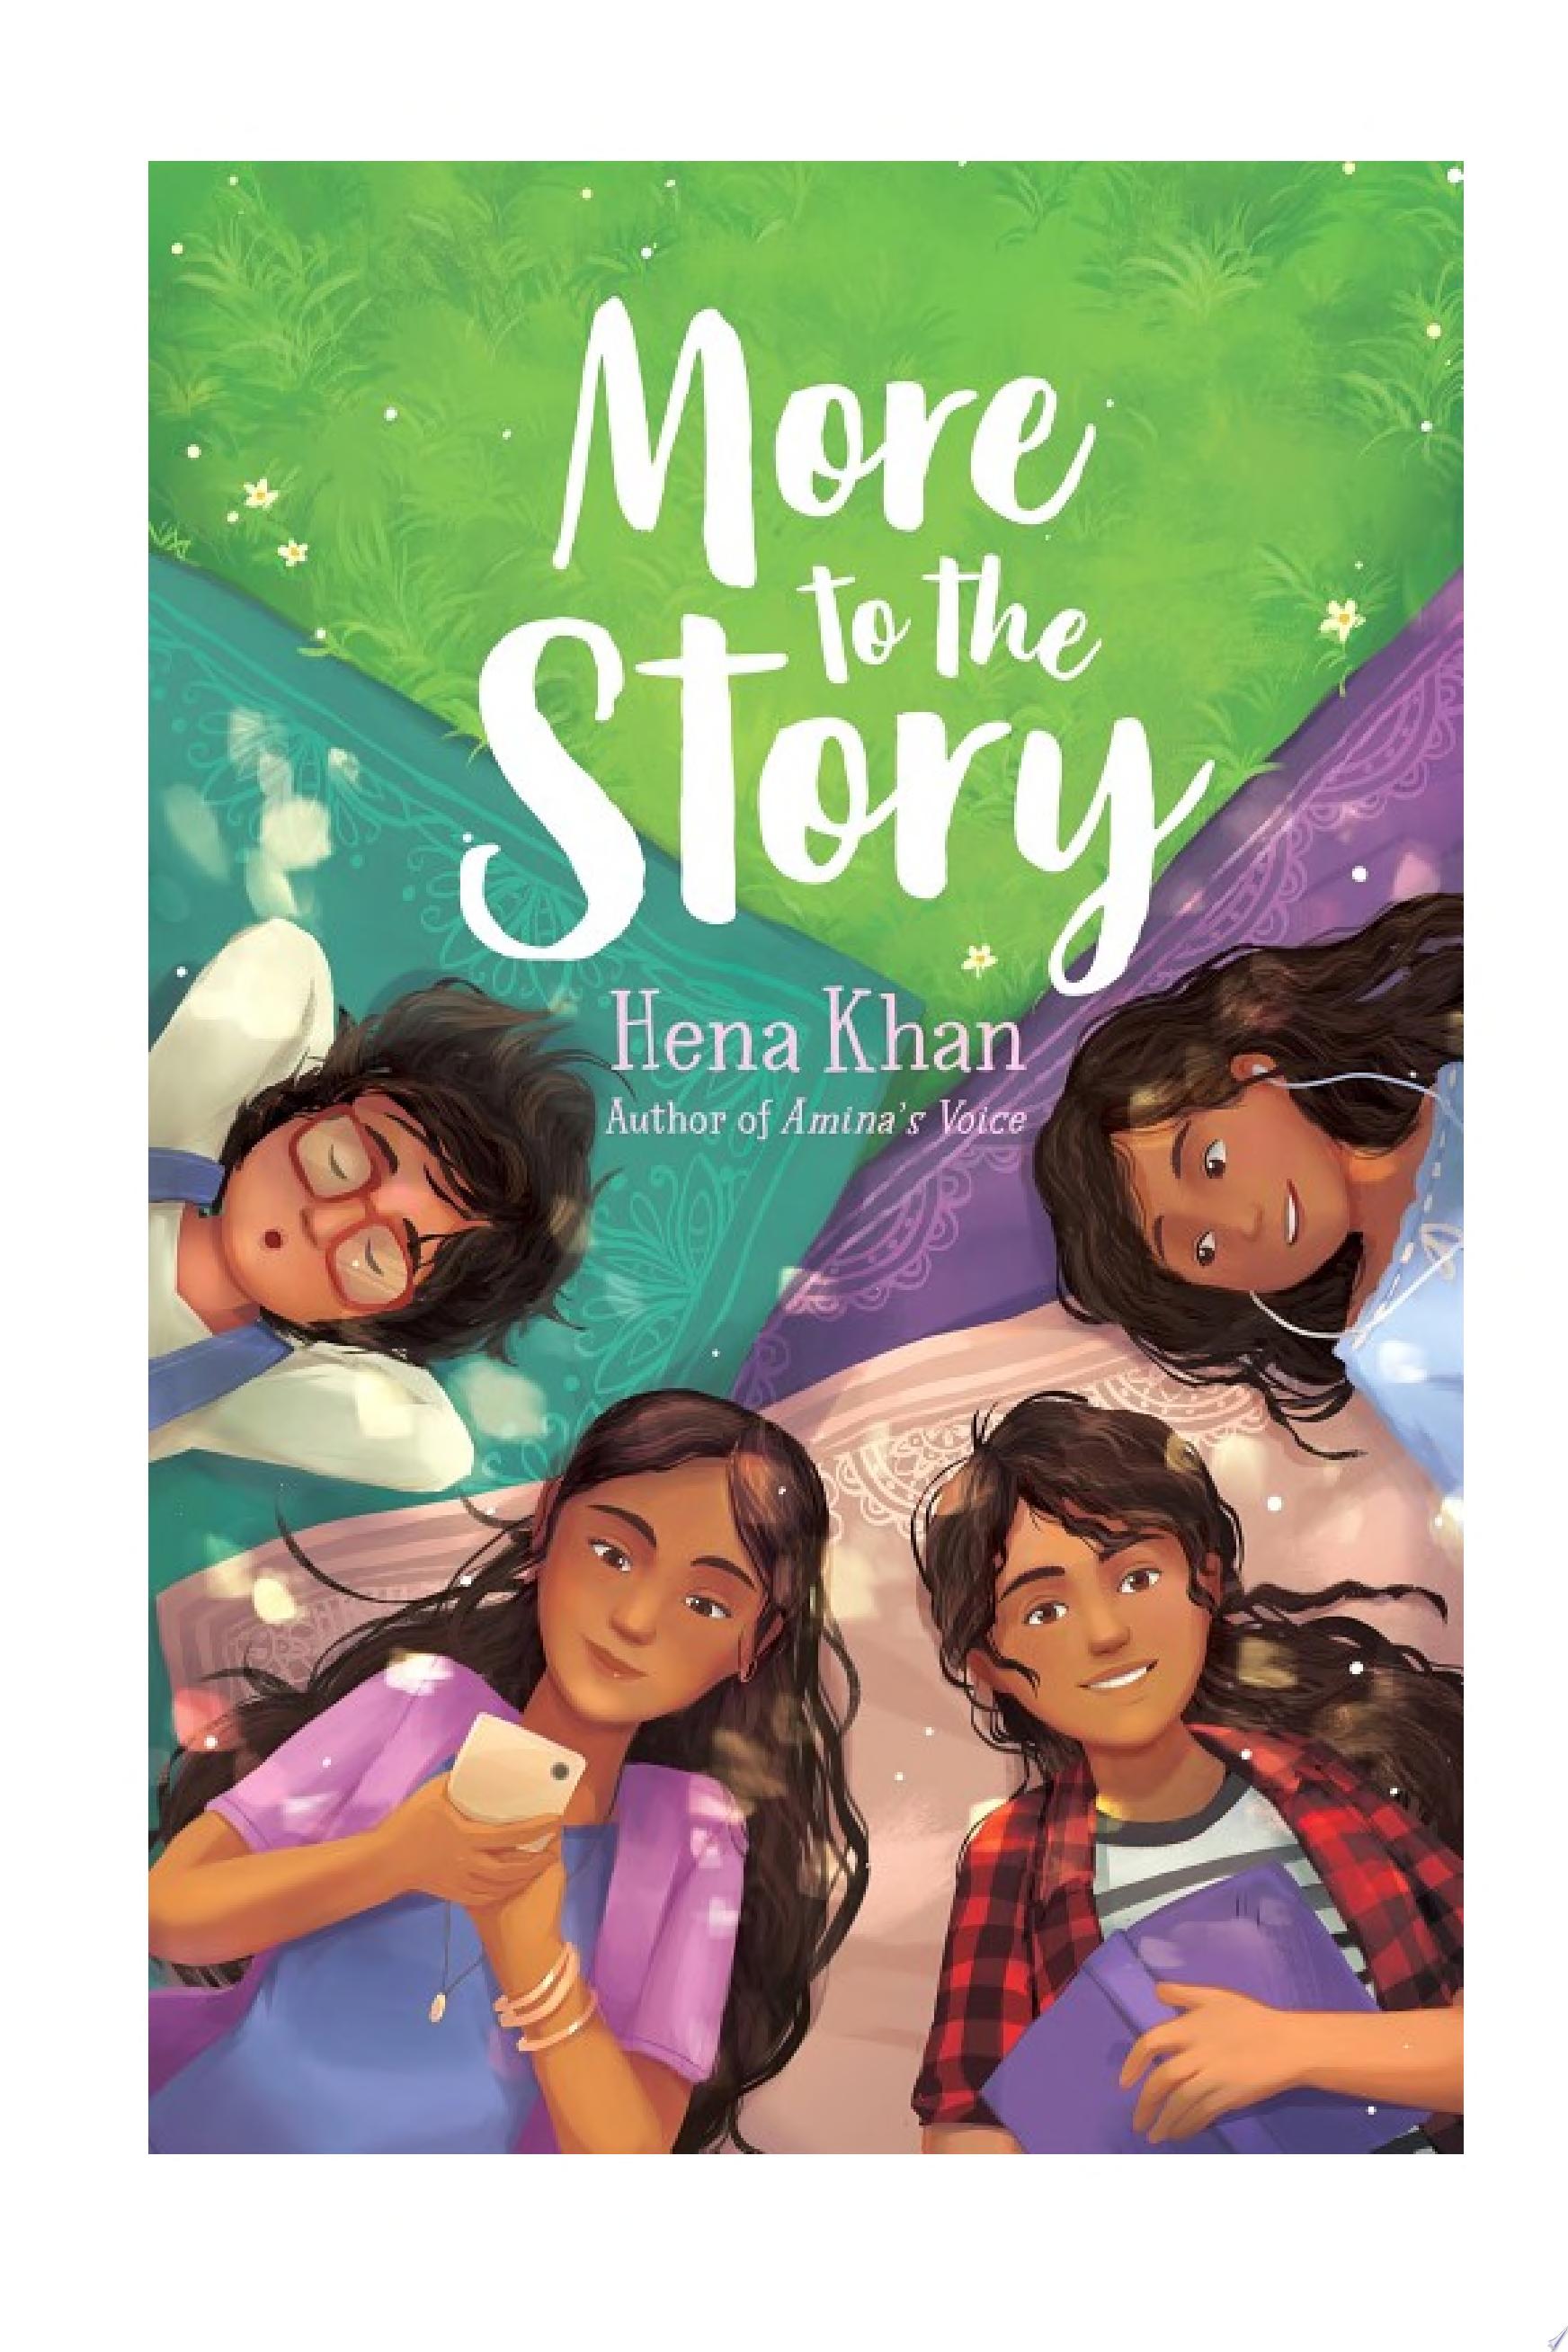 Image for "More to the Story"